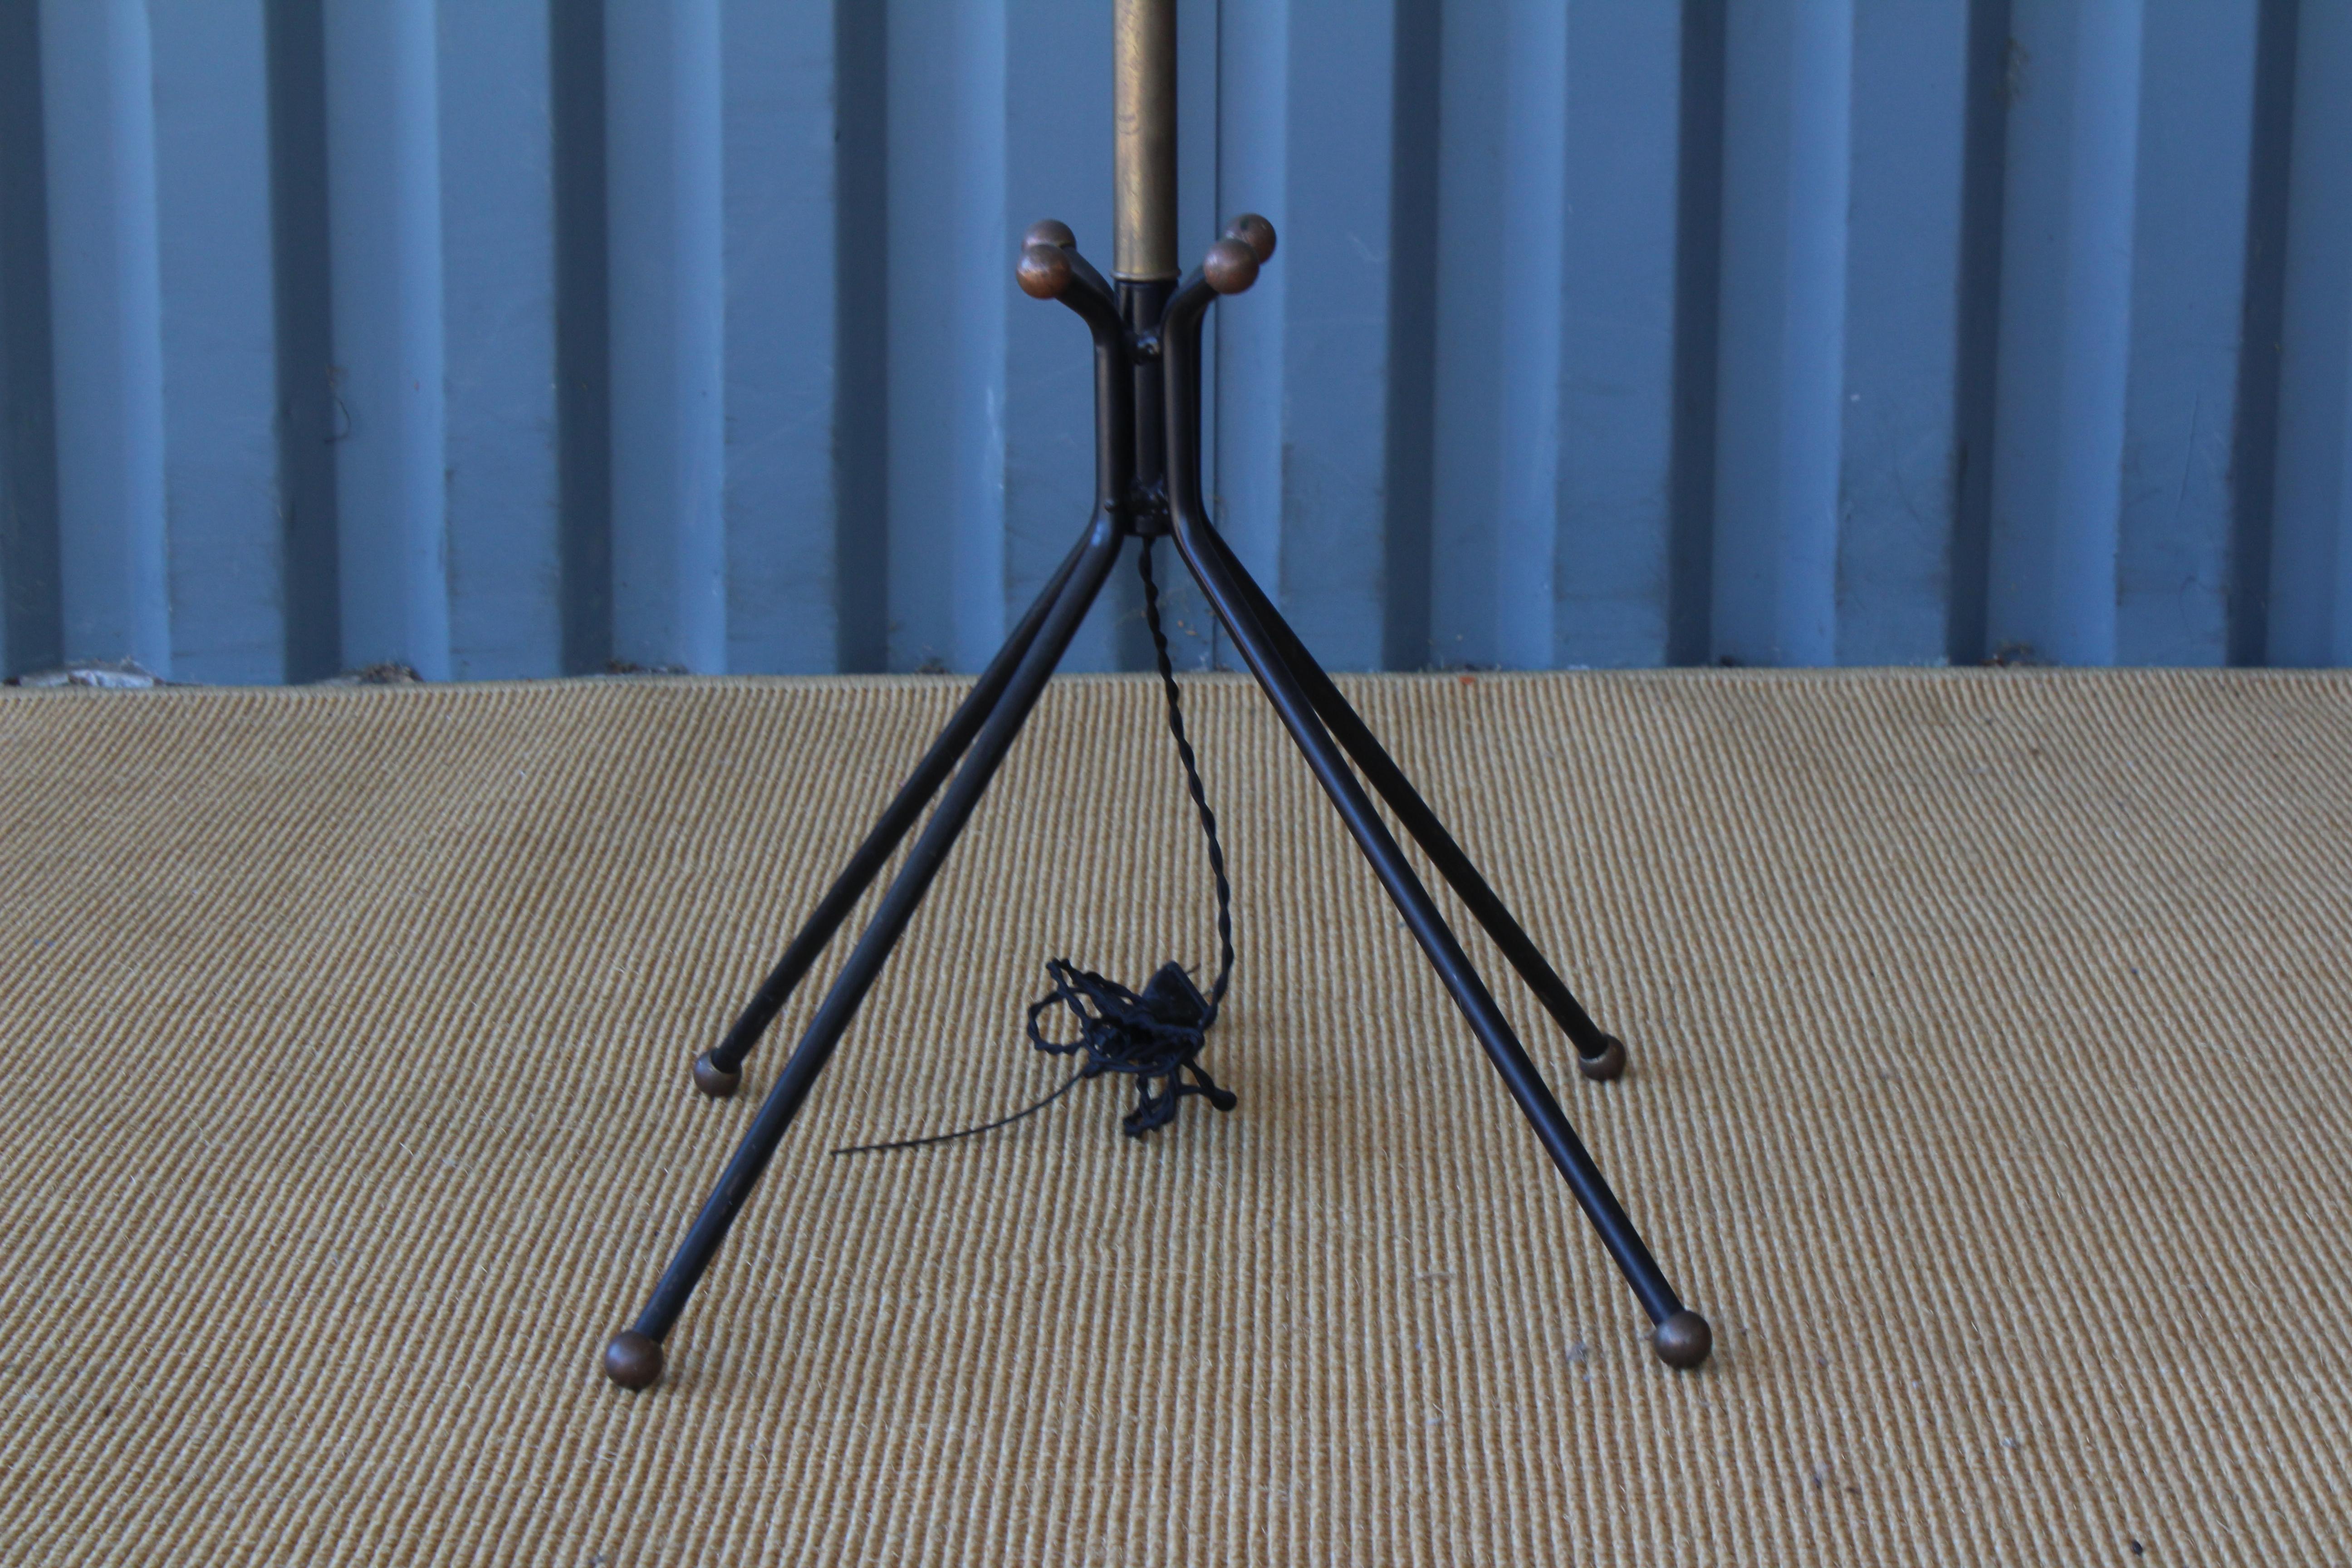 1960s Italian floor lamp with a brass stem and four legged metal base. Legs feature ball capped feet. Newly rewired and fitted with a custom-made shade in off-white linen.